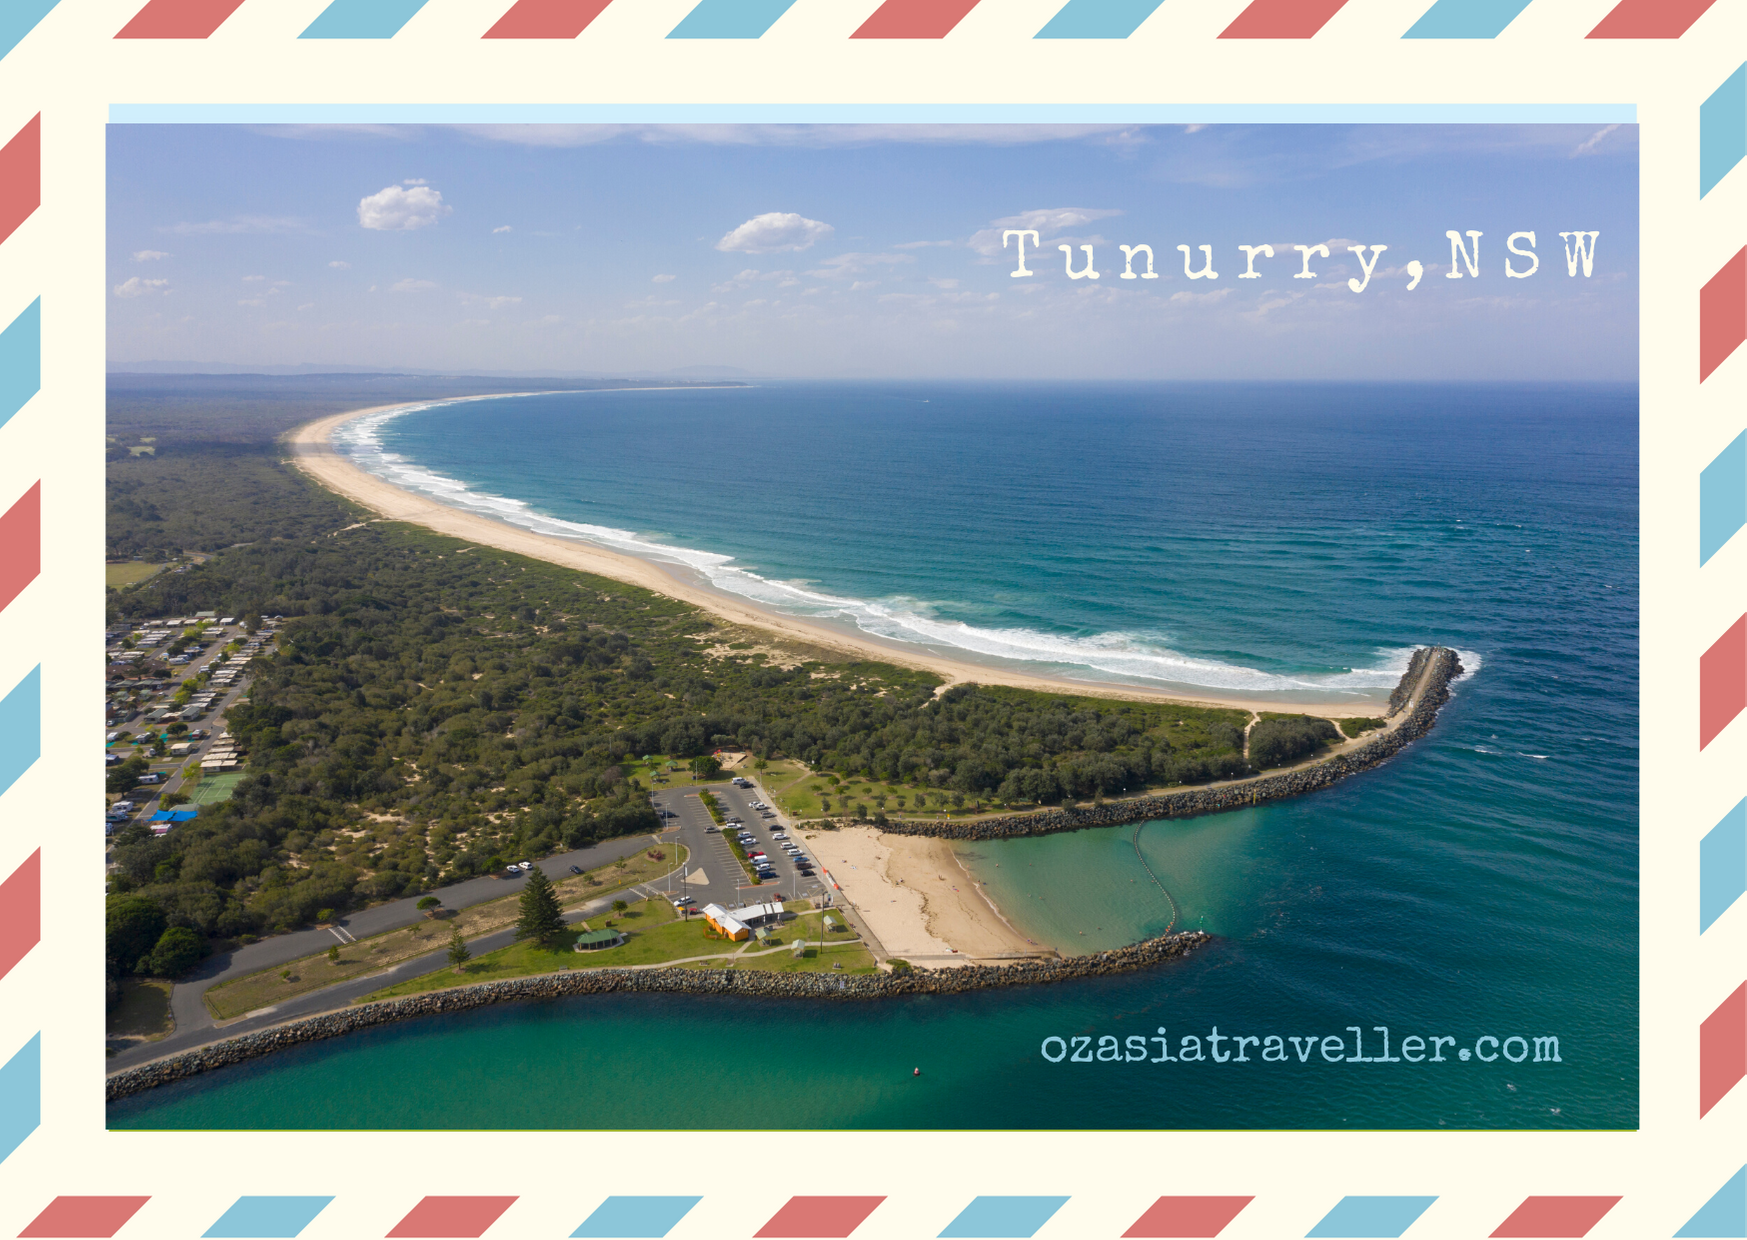 Forster and Tuncurry NSW